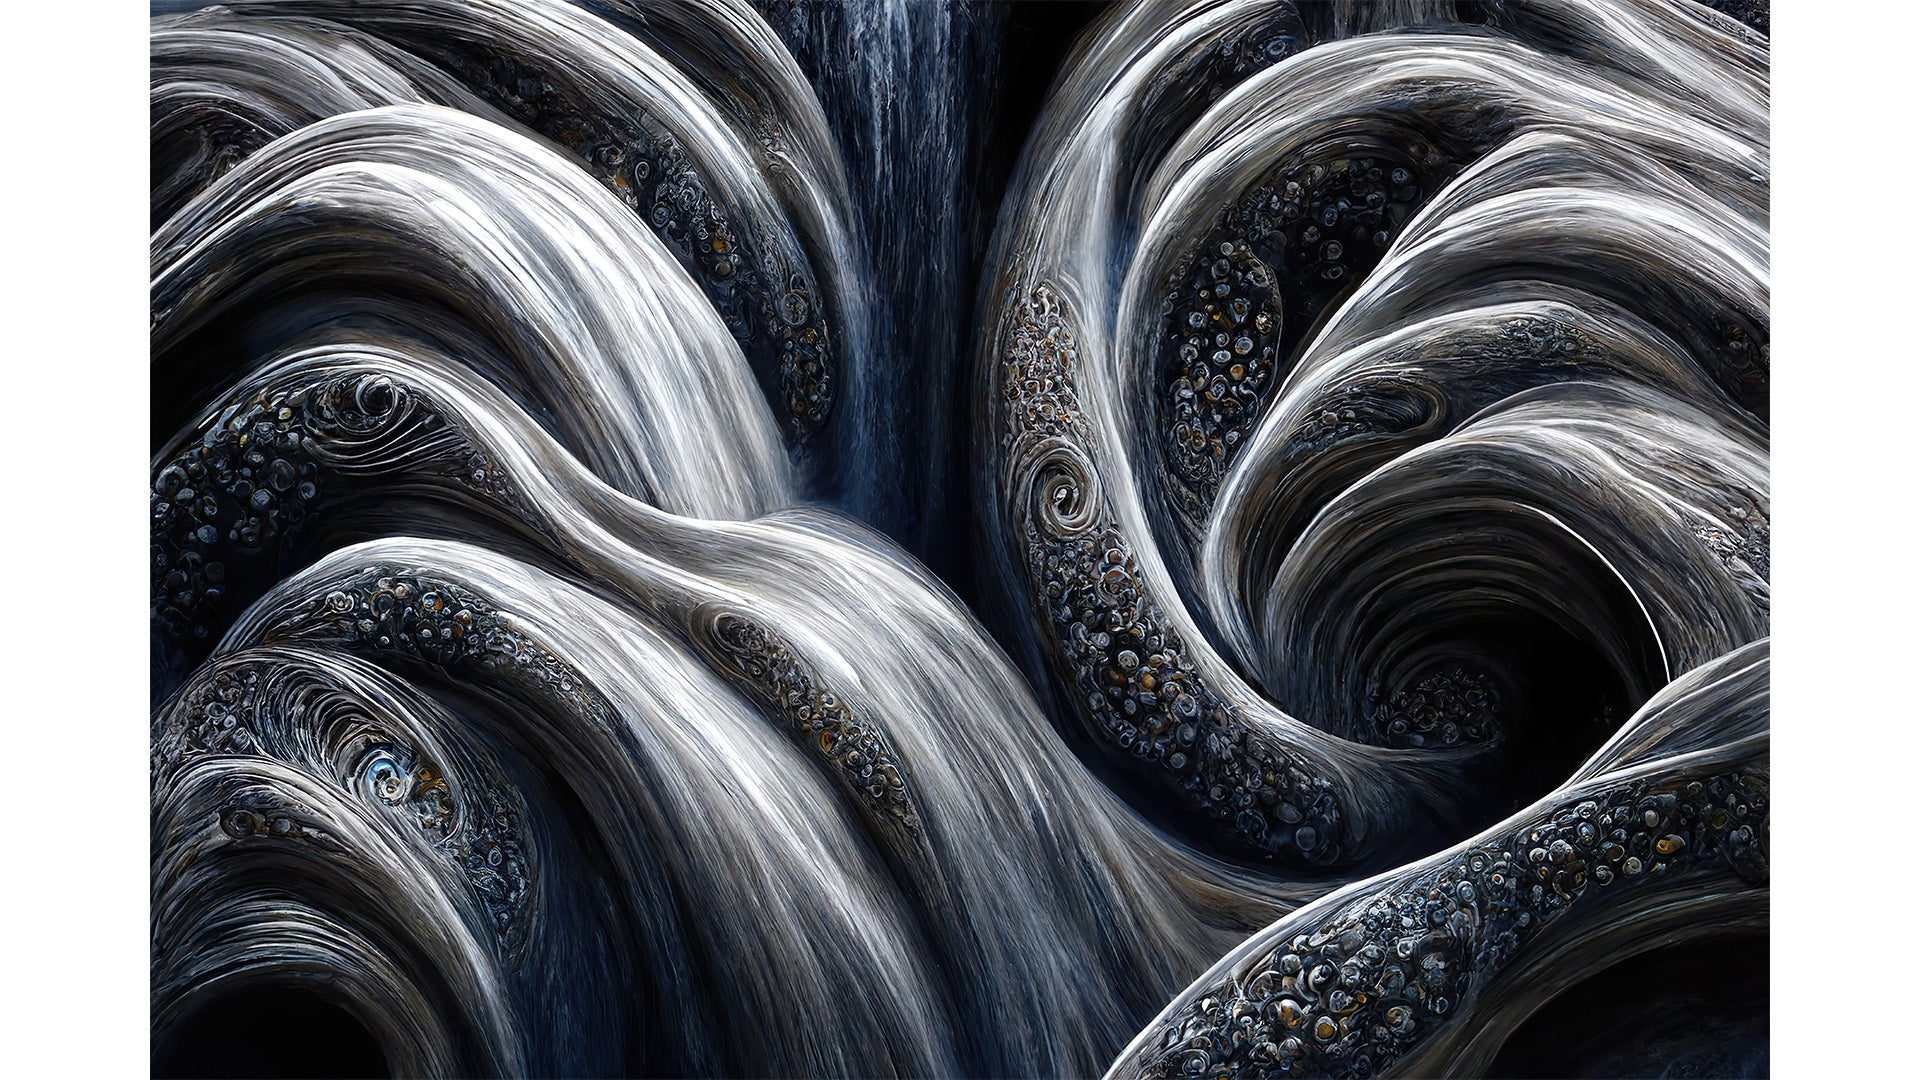 Een gekrulde waterval-nachtmerrie - The Curled Cascade Labyrinth